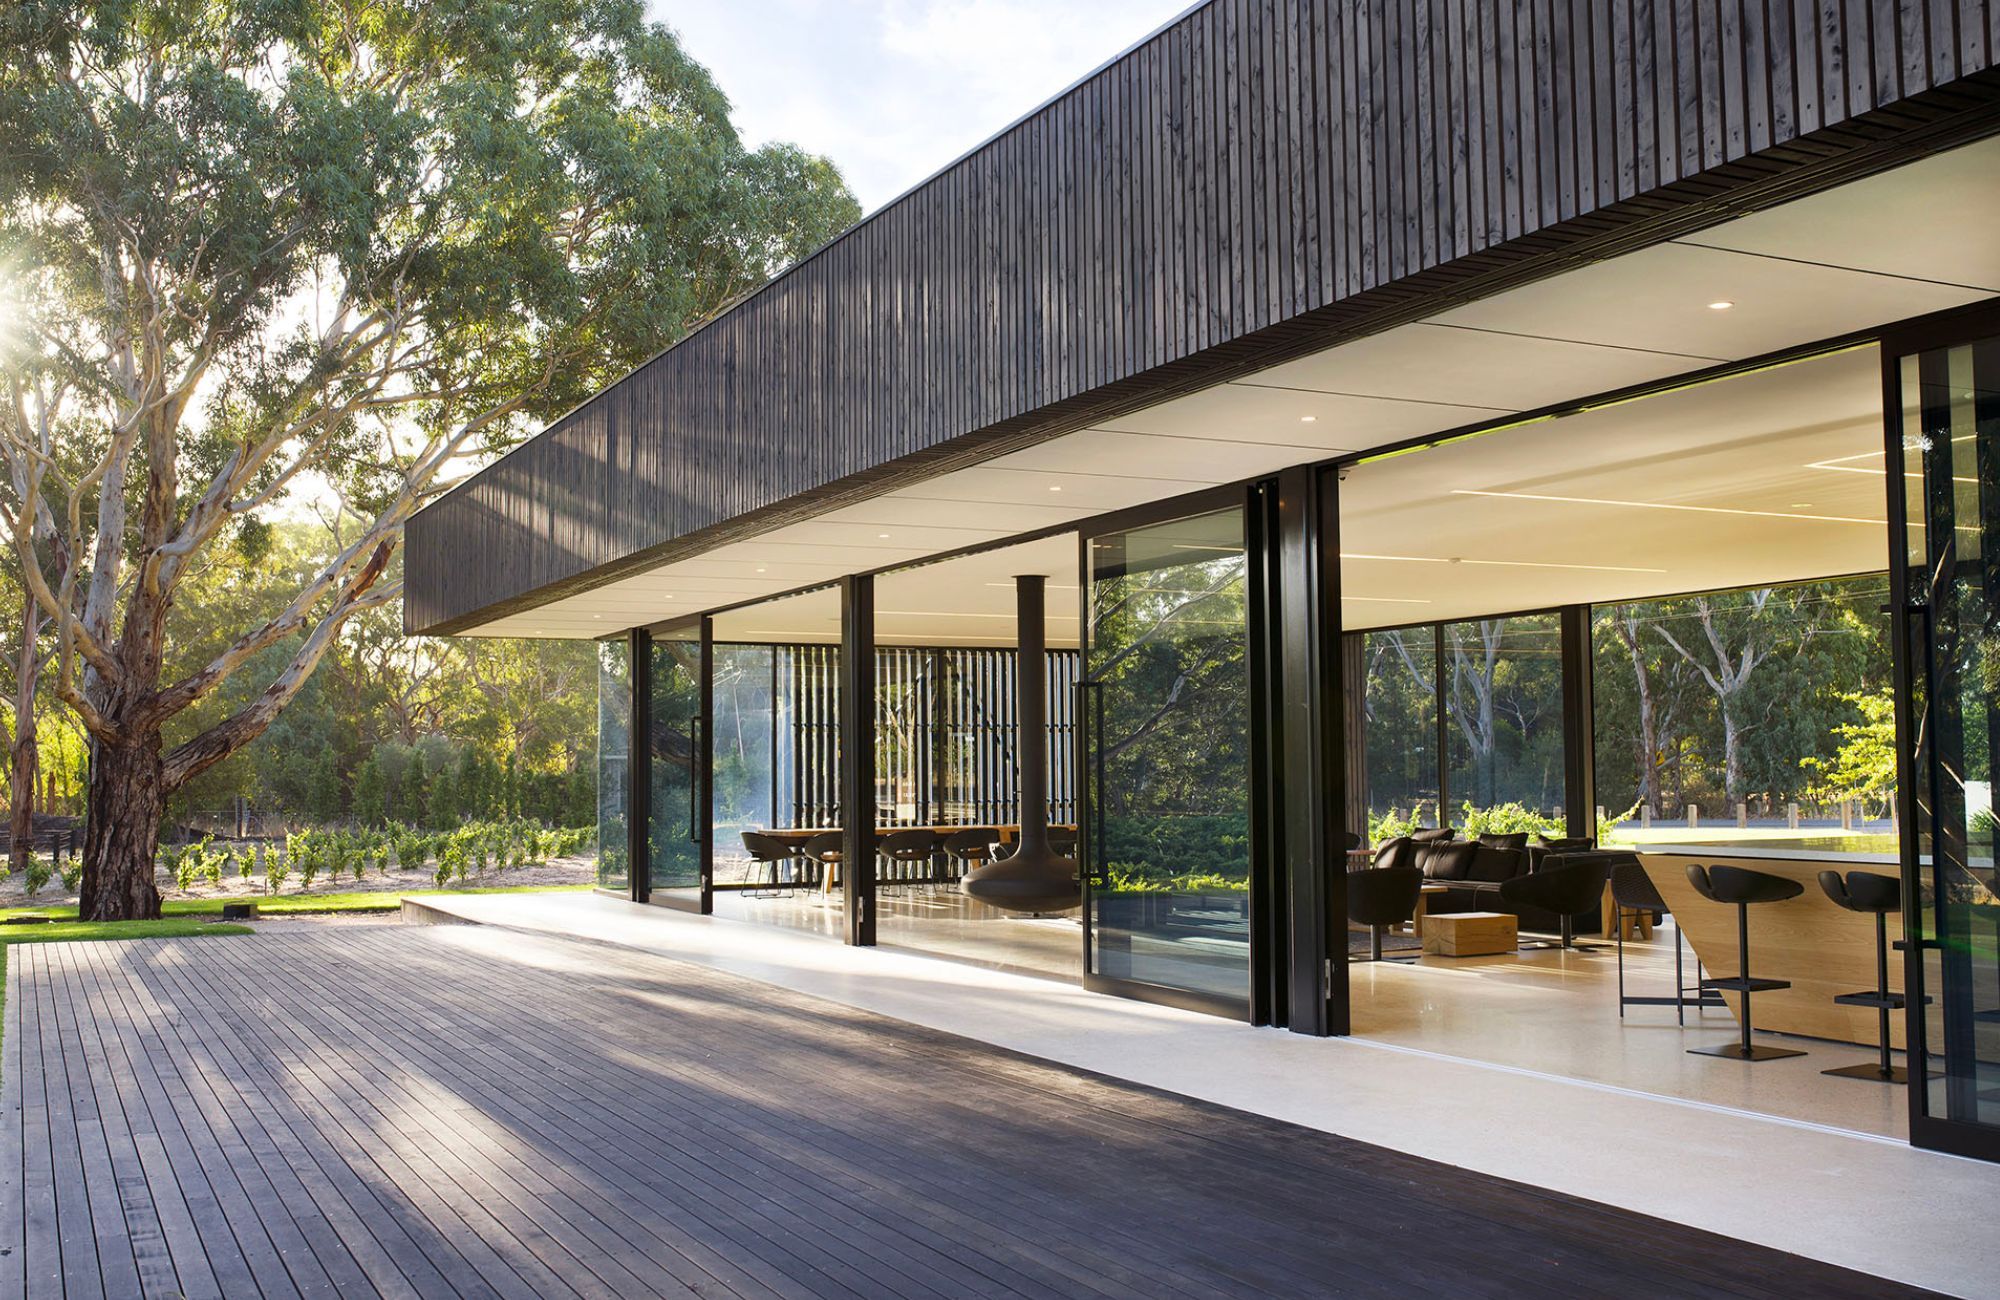 Beresford Wines Cellar Door by Alexander Brown Architects showing timber deck